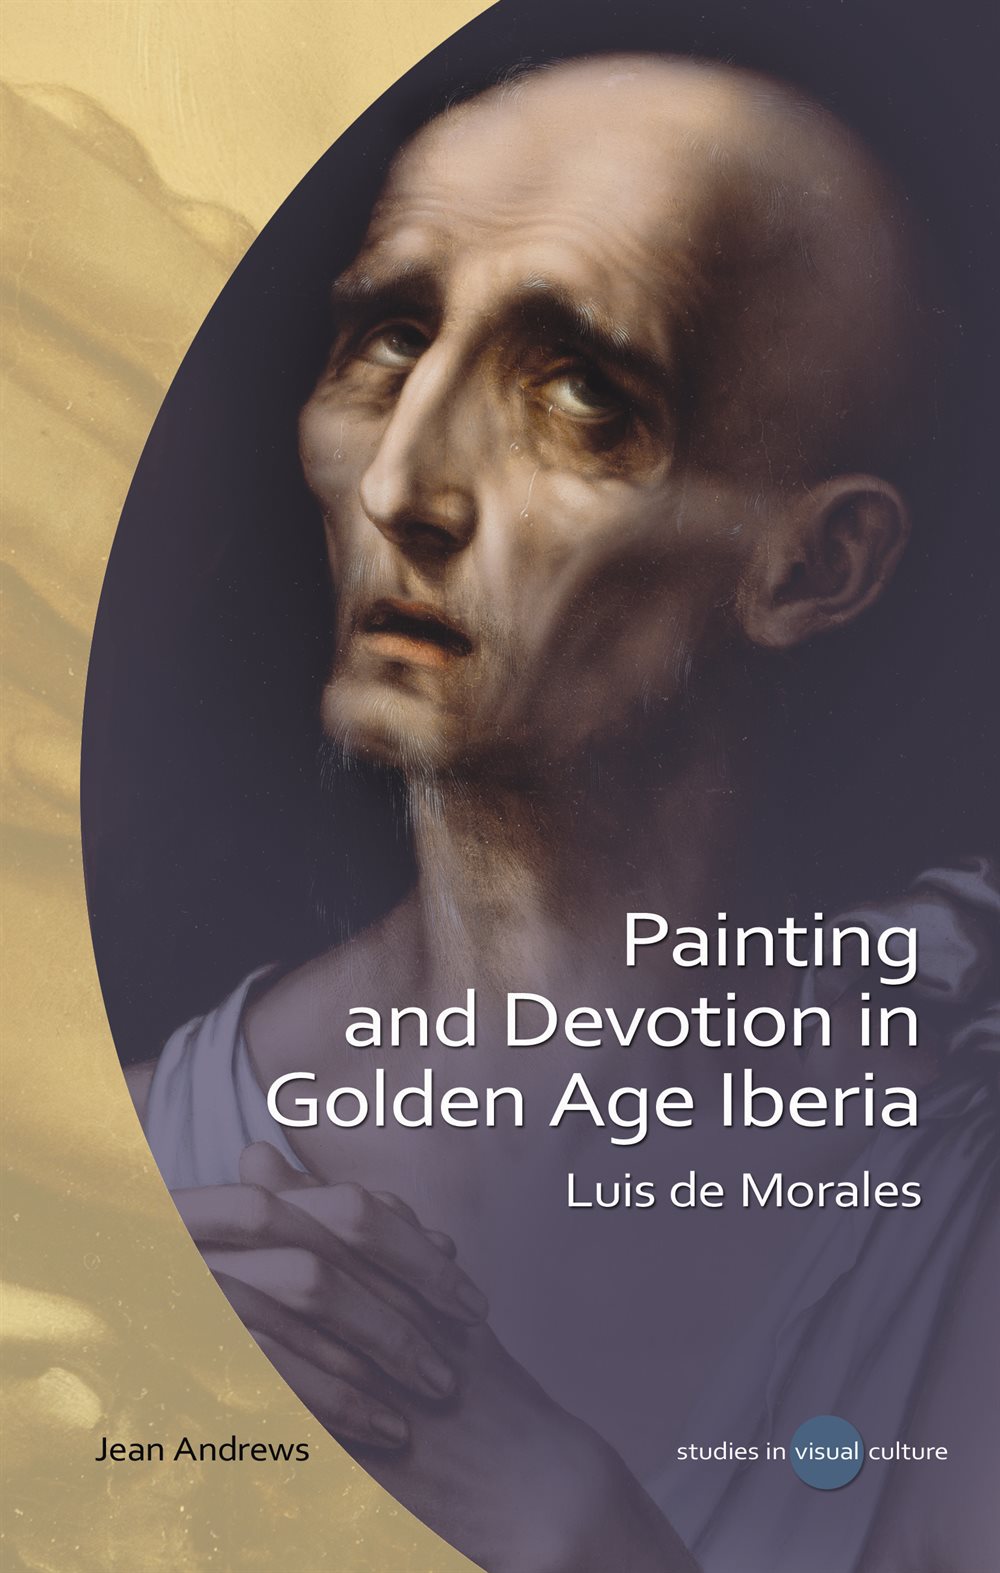 Book cover with painting of thinning man on front